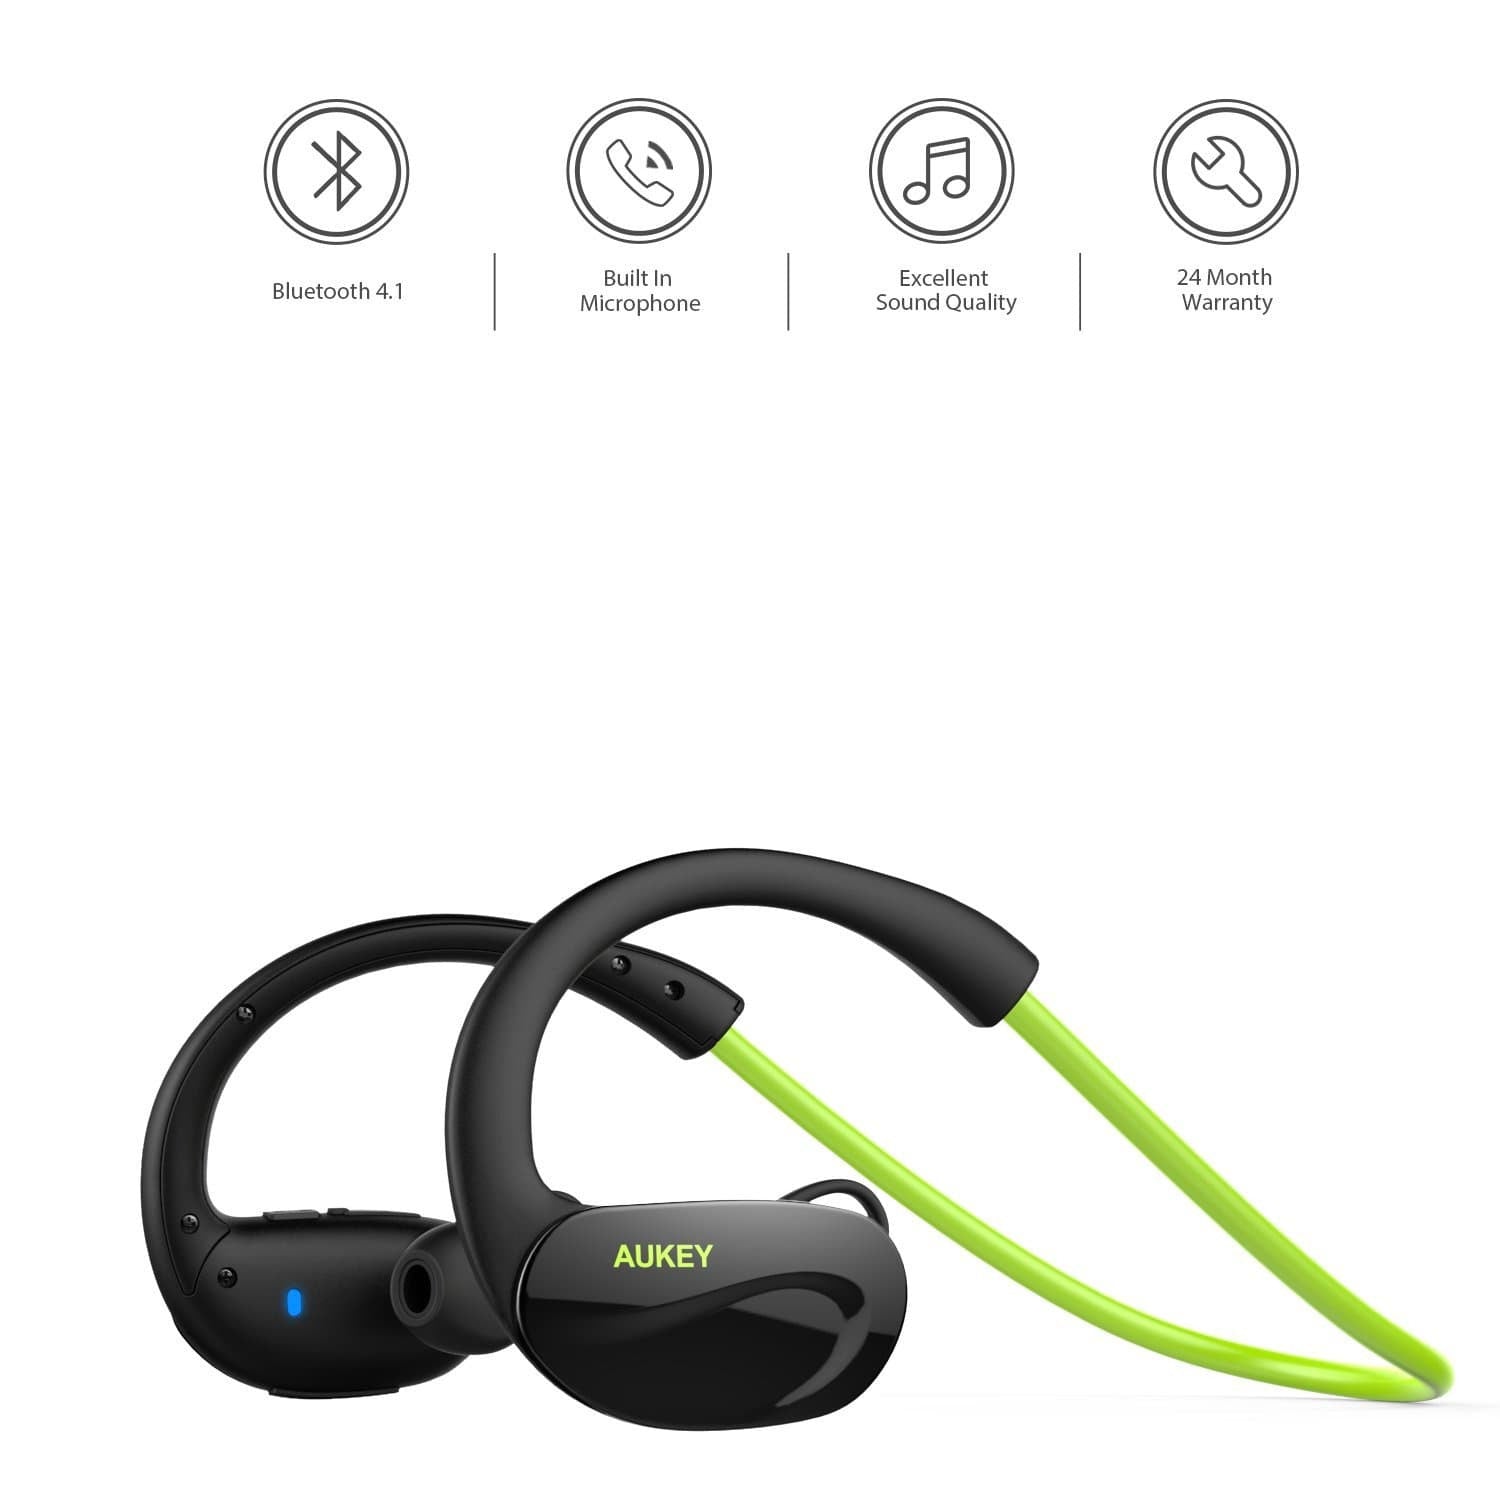 AUKEY EP-B34 Feather Light Wireless sport bluetooth stereo earphone - Aukey Malaysia Official Store